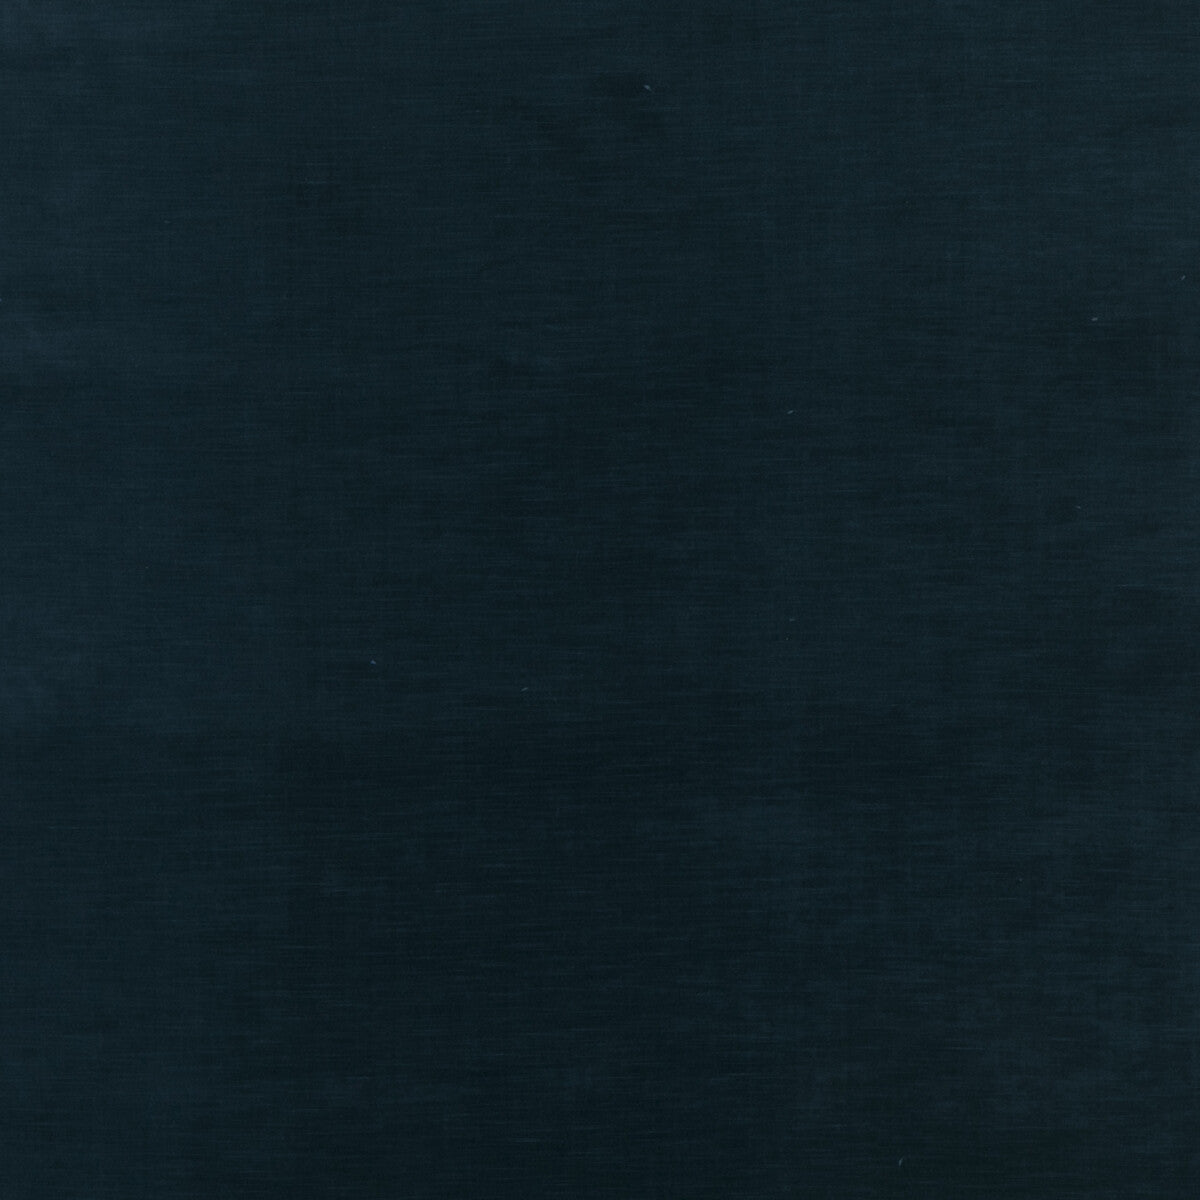 Quintessential Velvet fabric in midnight color - pattern ED85359.690.0 - by Threads in the Quintessential Velvet collection